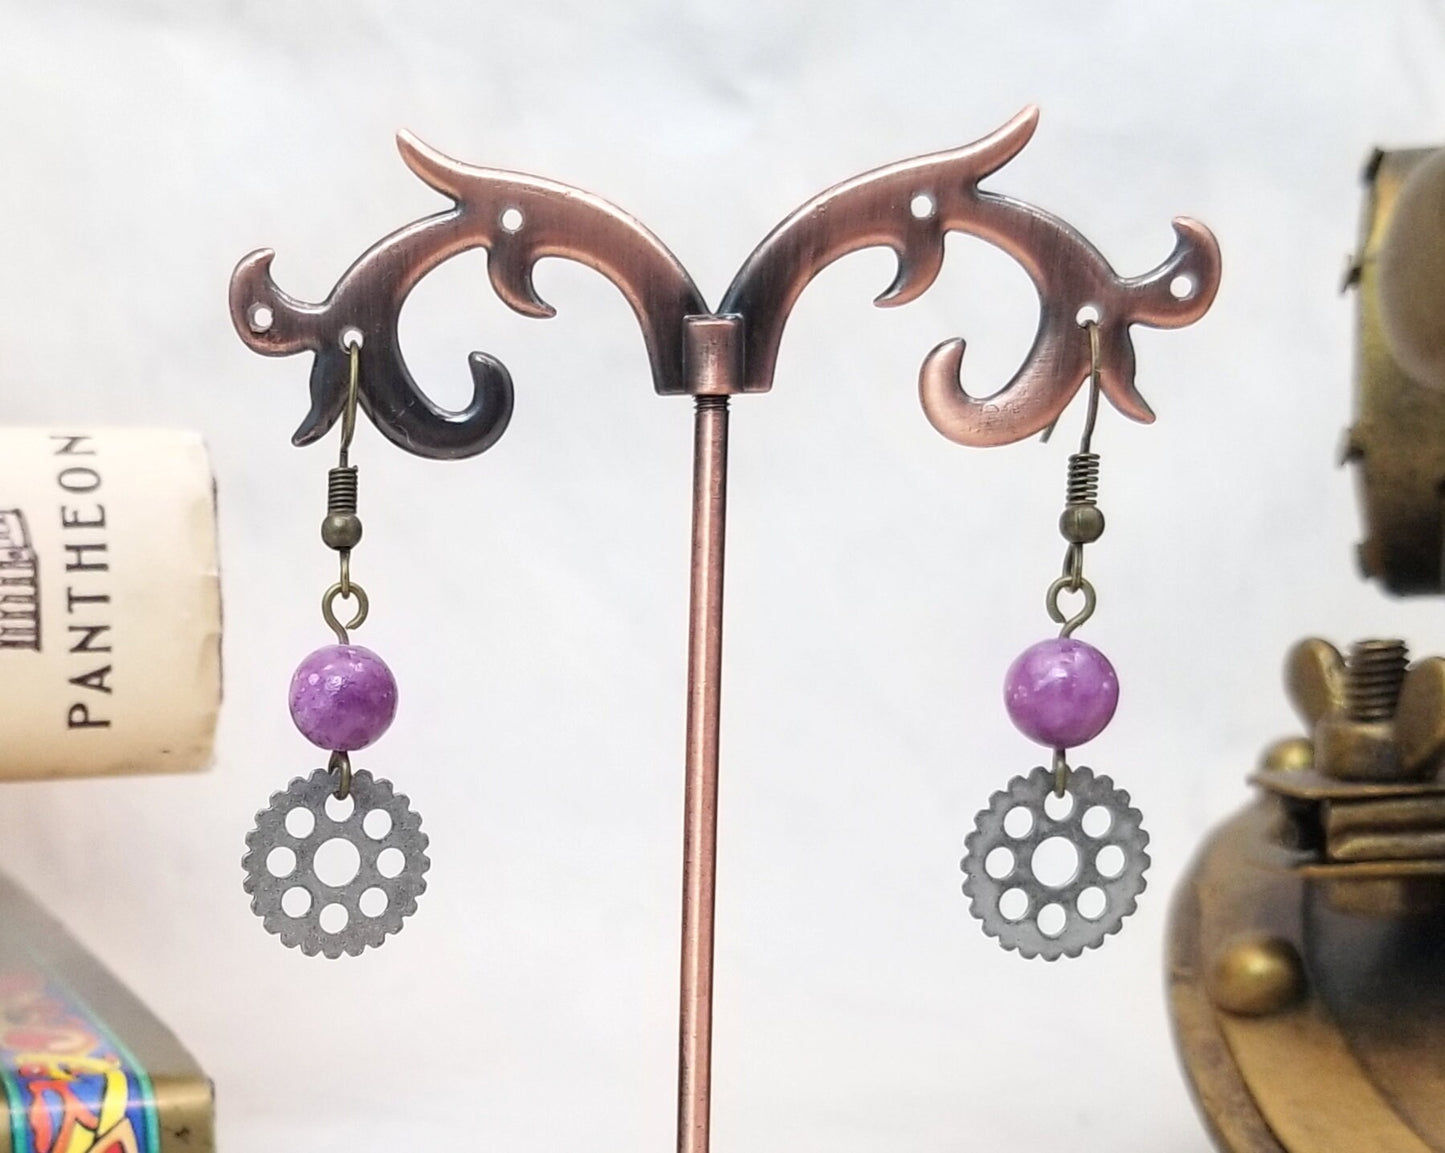 Steampunk Earrings with Beads Over Gears, Party, Wedding, Bridesmaid, Choice of Colors